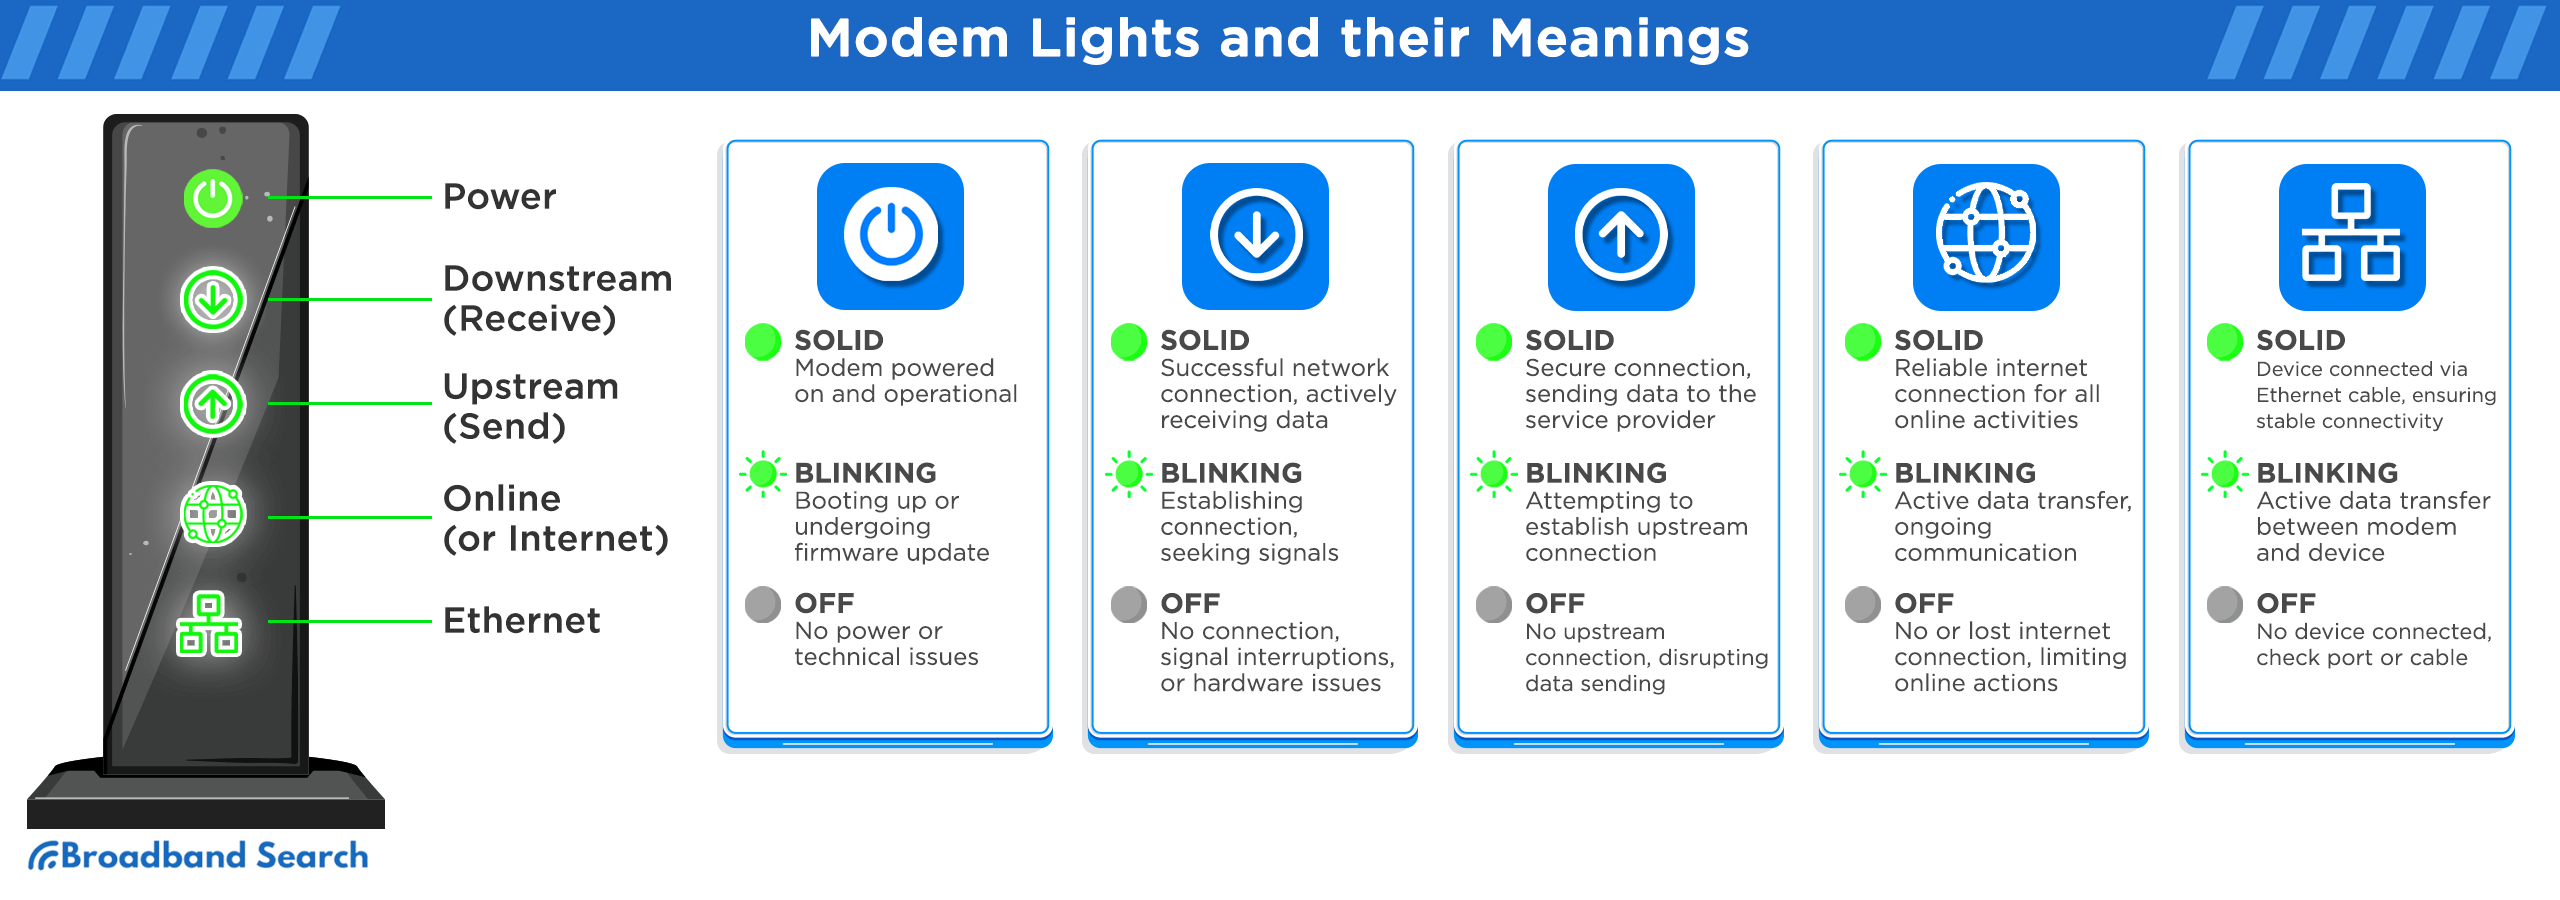 Modem lights and their meanings